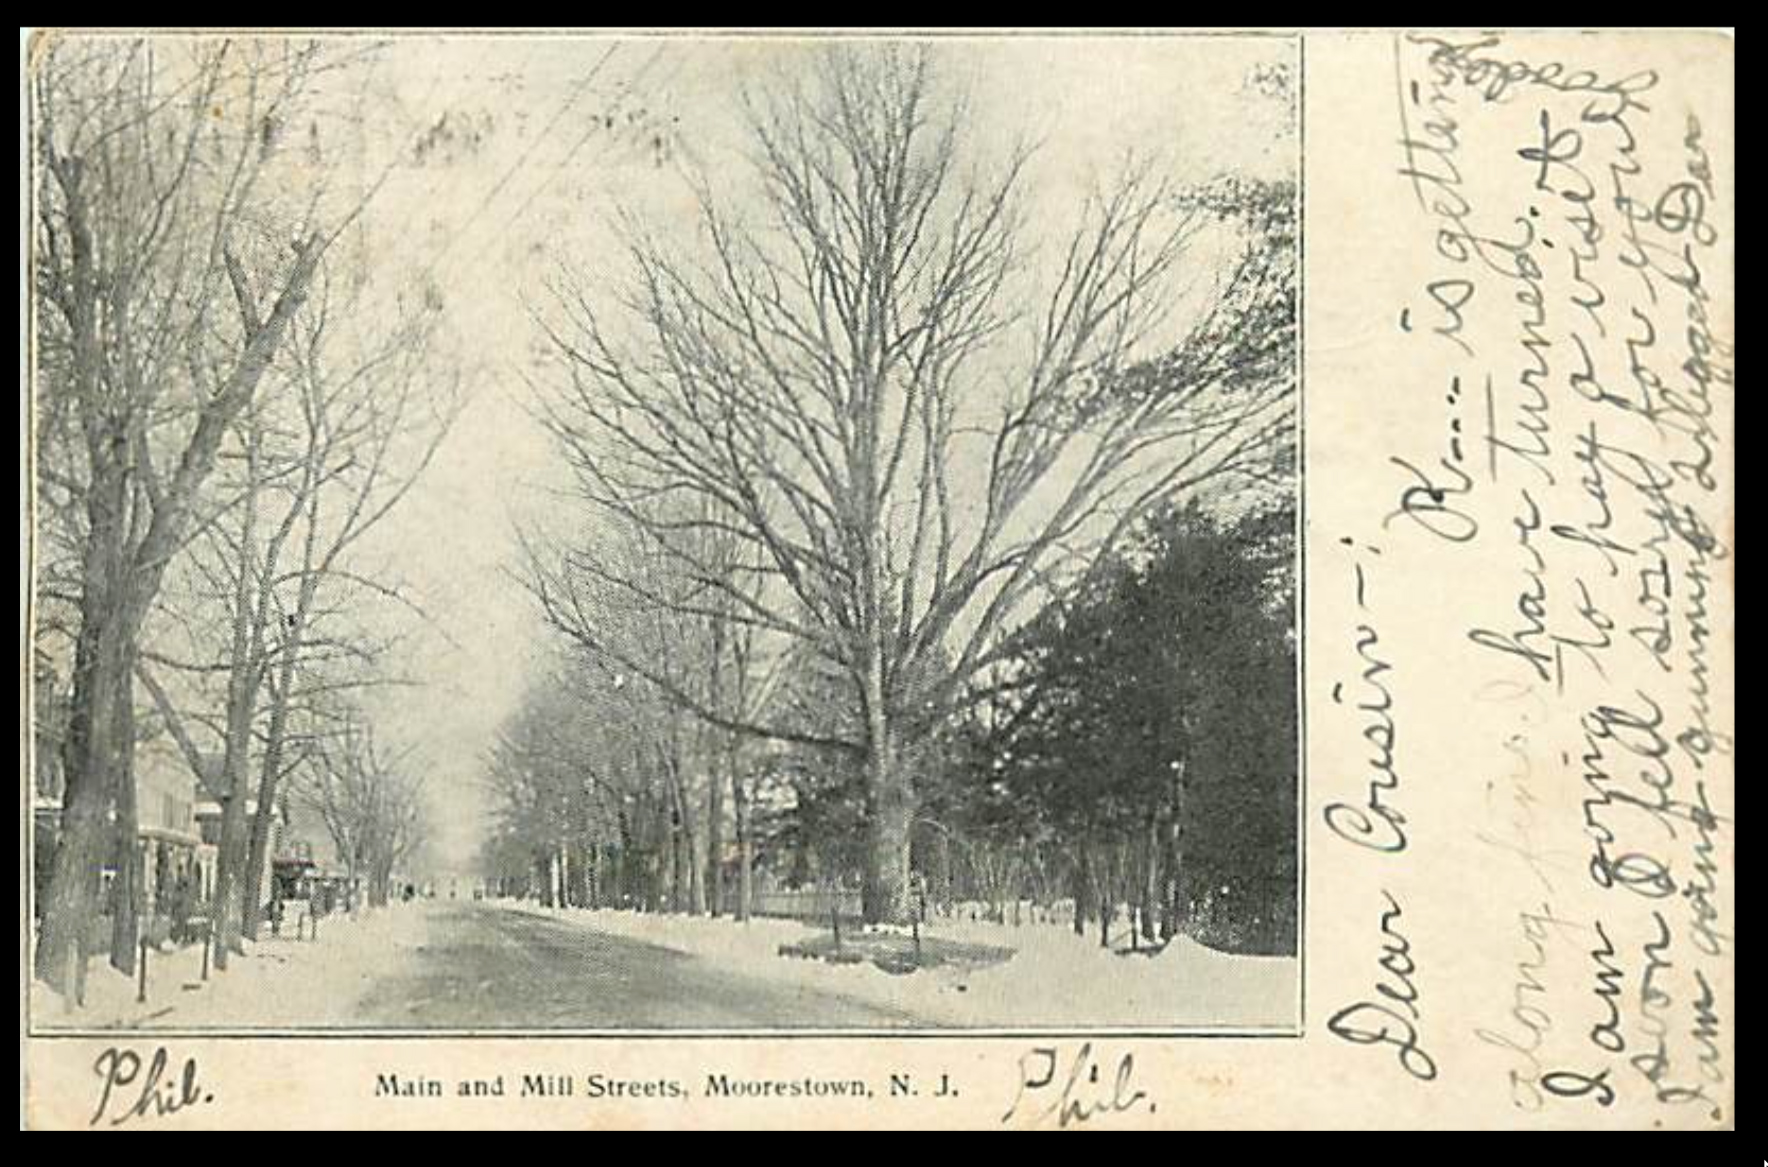 Moorestown - view at Main and Mill Streets - c 1910